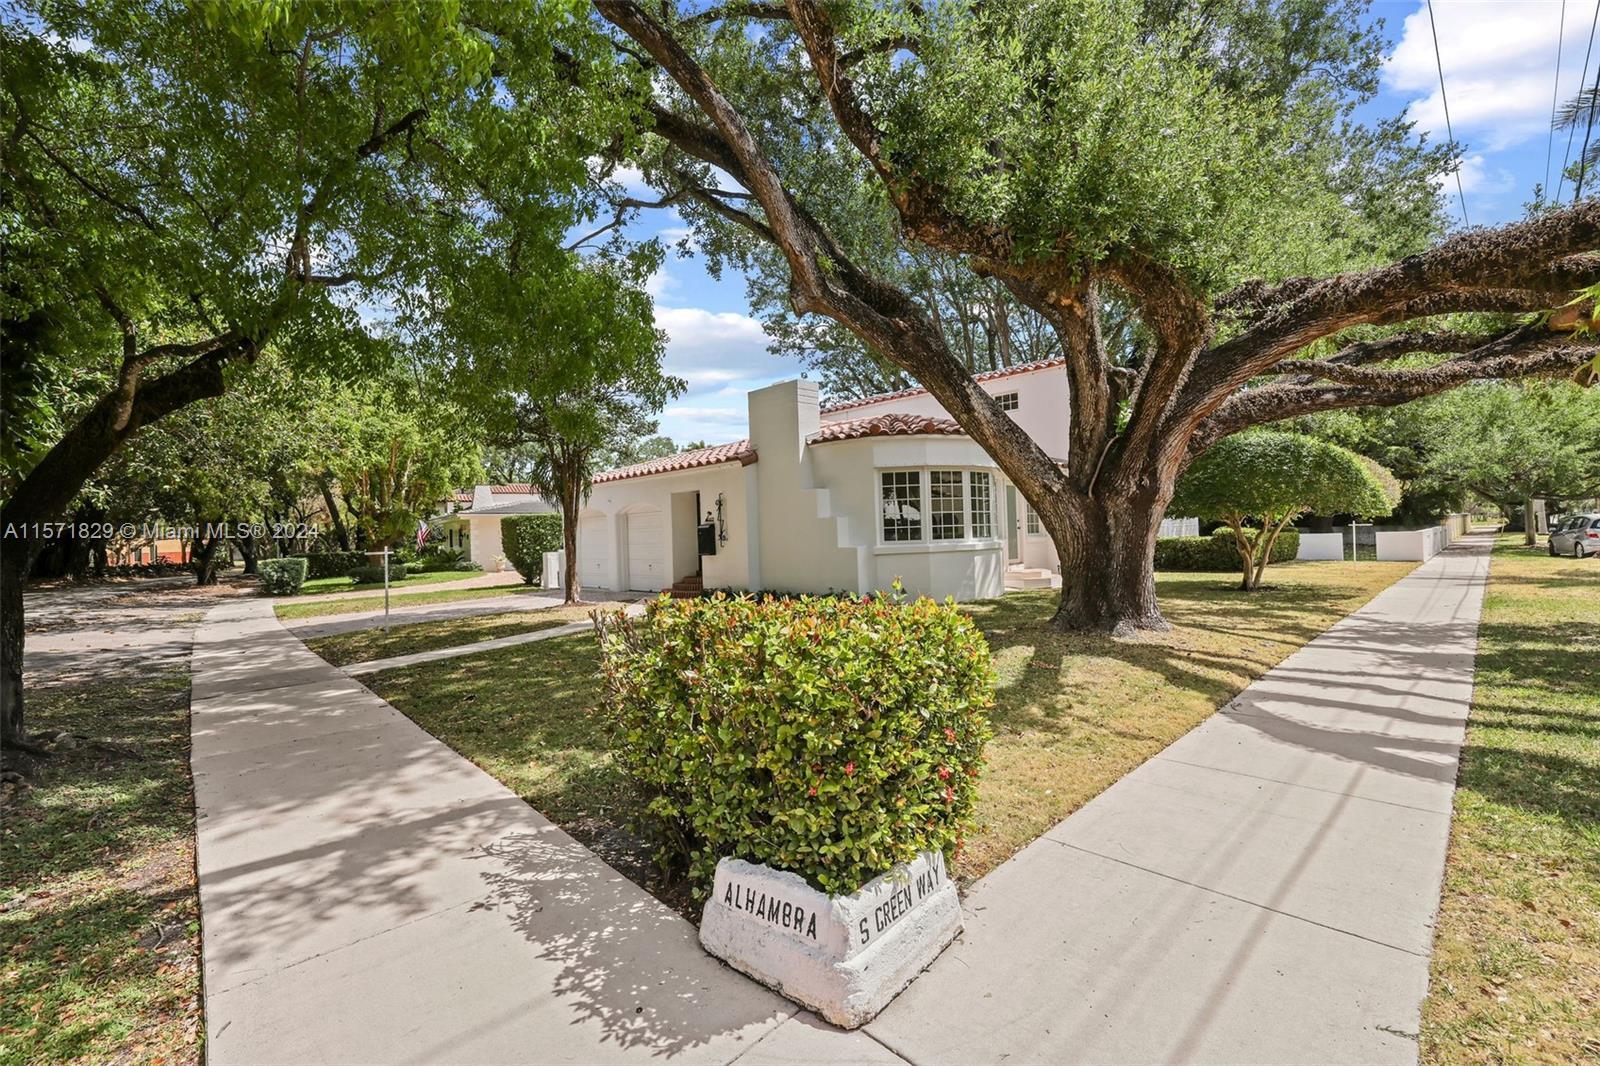 LOCATION, LOCATION, LOCATION !! THIS CLASSIC BEAUTY IS LOCATED ON THE CORNER OF SOUTH 
 GREENWAY  A